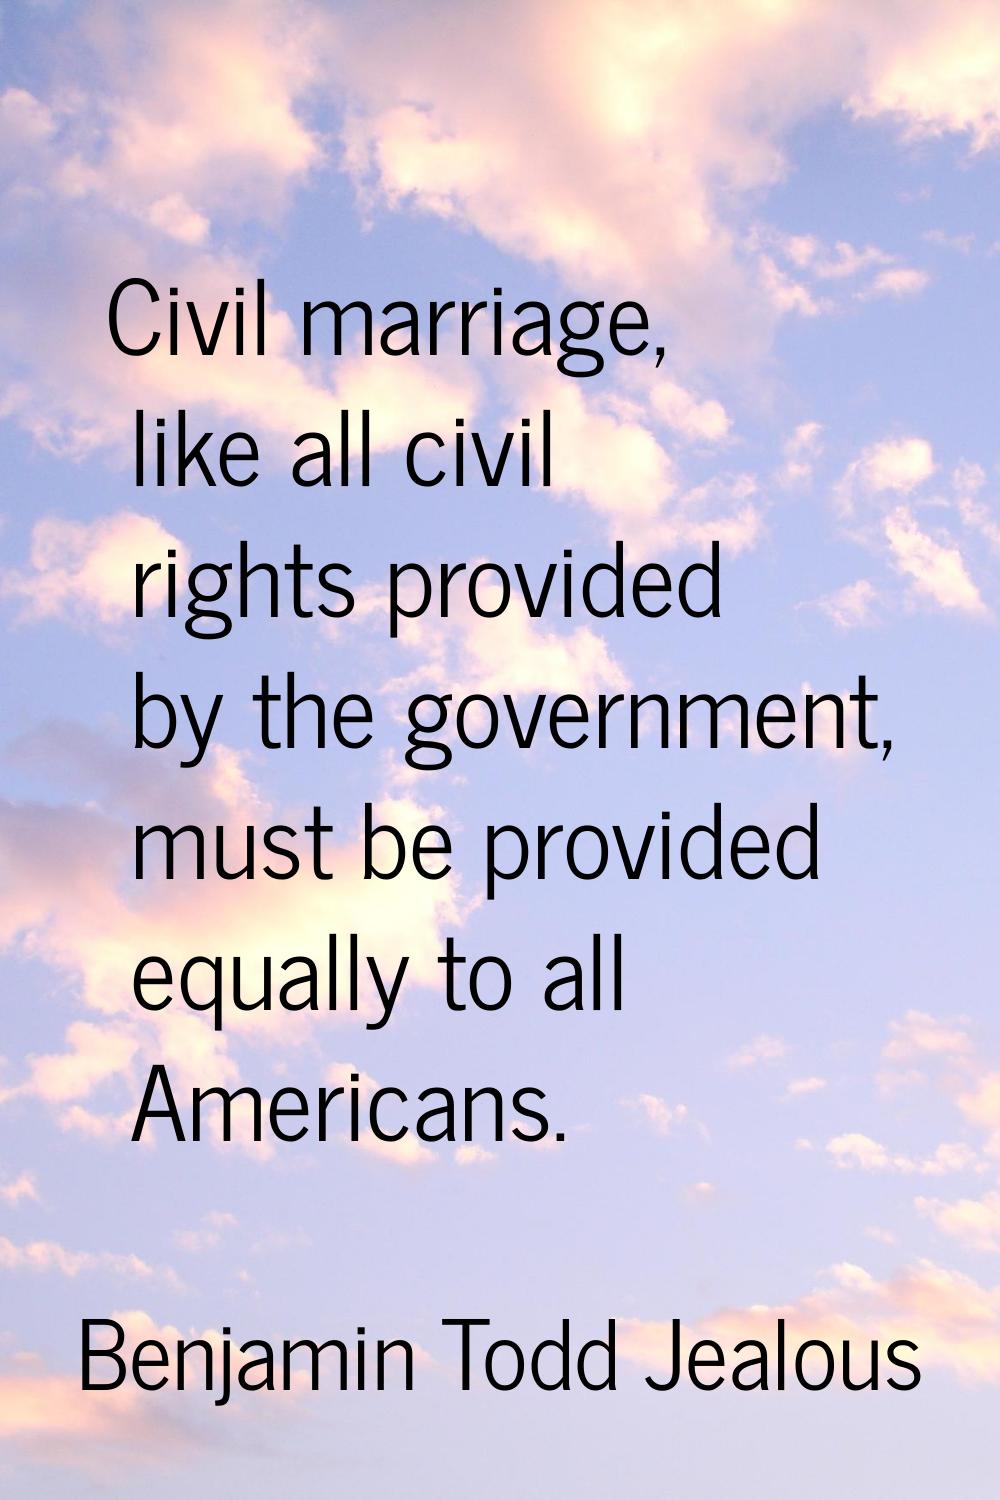 Civil marriage, like all civil rights provided by the government, must be provided equally to all A